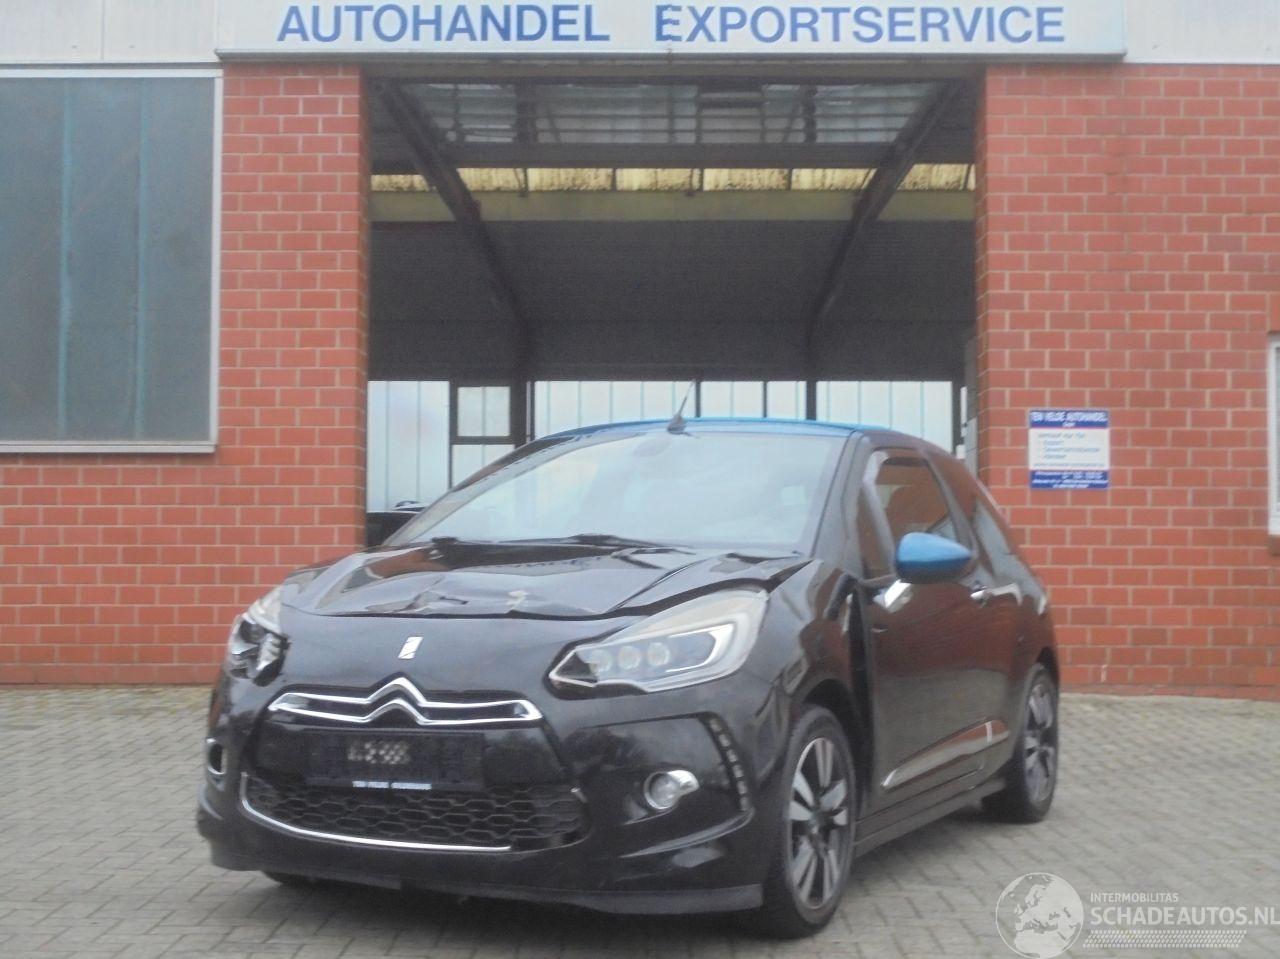 Citroën DS3 Cabrio 88kw Automaat, Climate & Cruise control, PDC